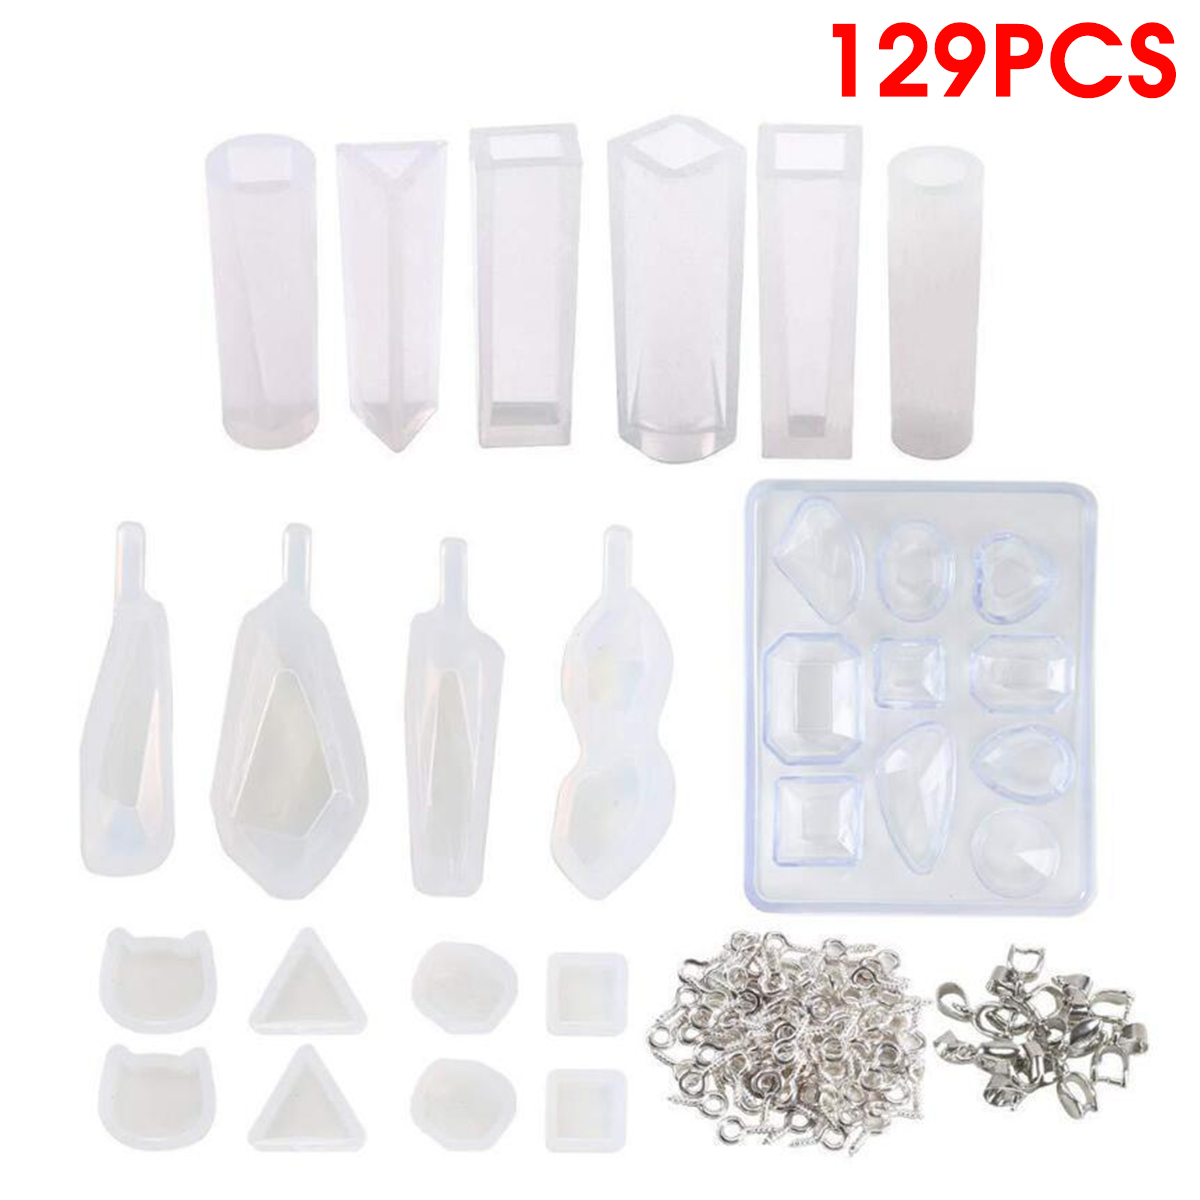 129PcsSet-Silicone-Casting-Molds-Tools-Jewelry-Pendant-Resin-Mould-DIY-1613609-1